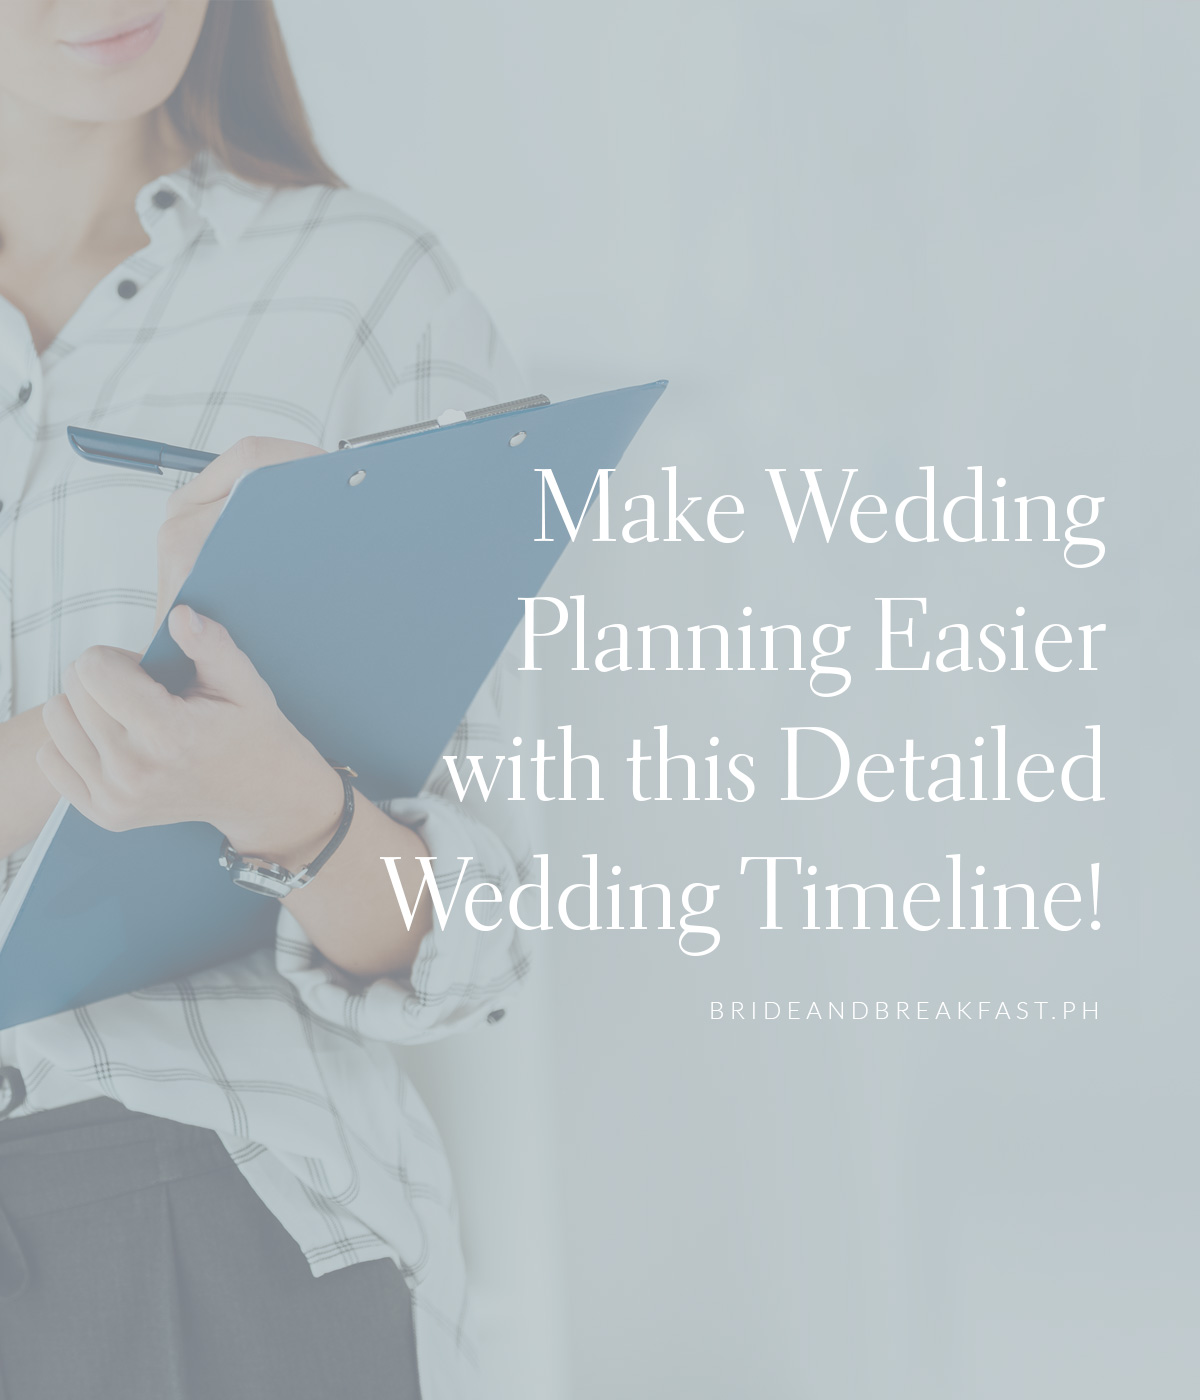 Make Wedding Planning Easier with this Detailed Wedding Timeline!